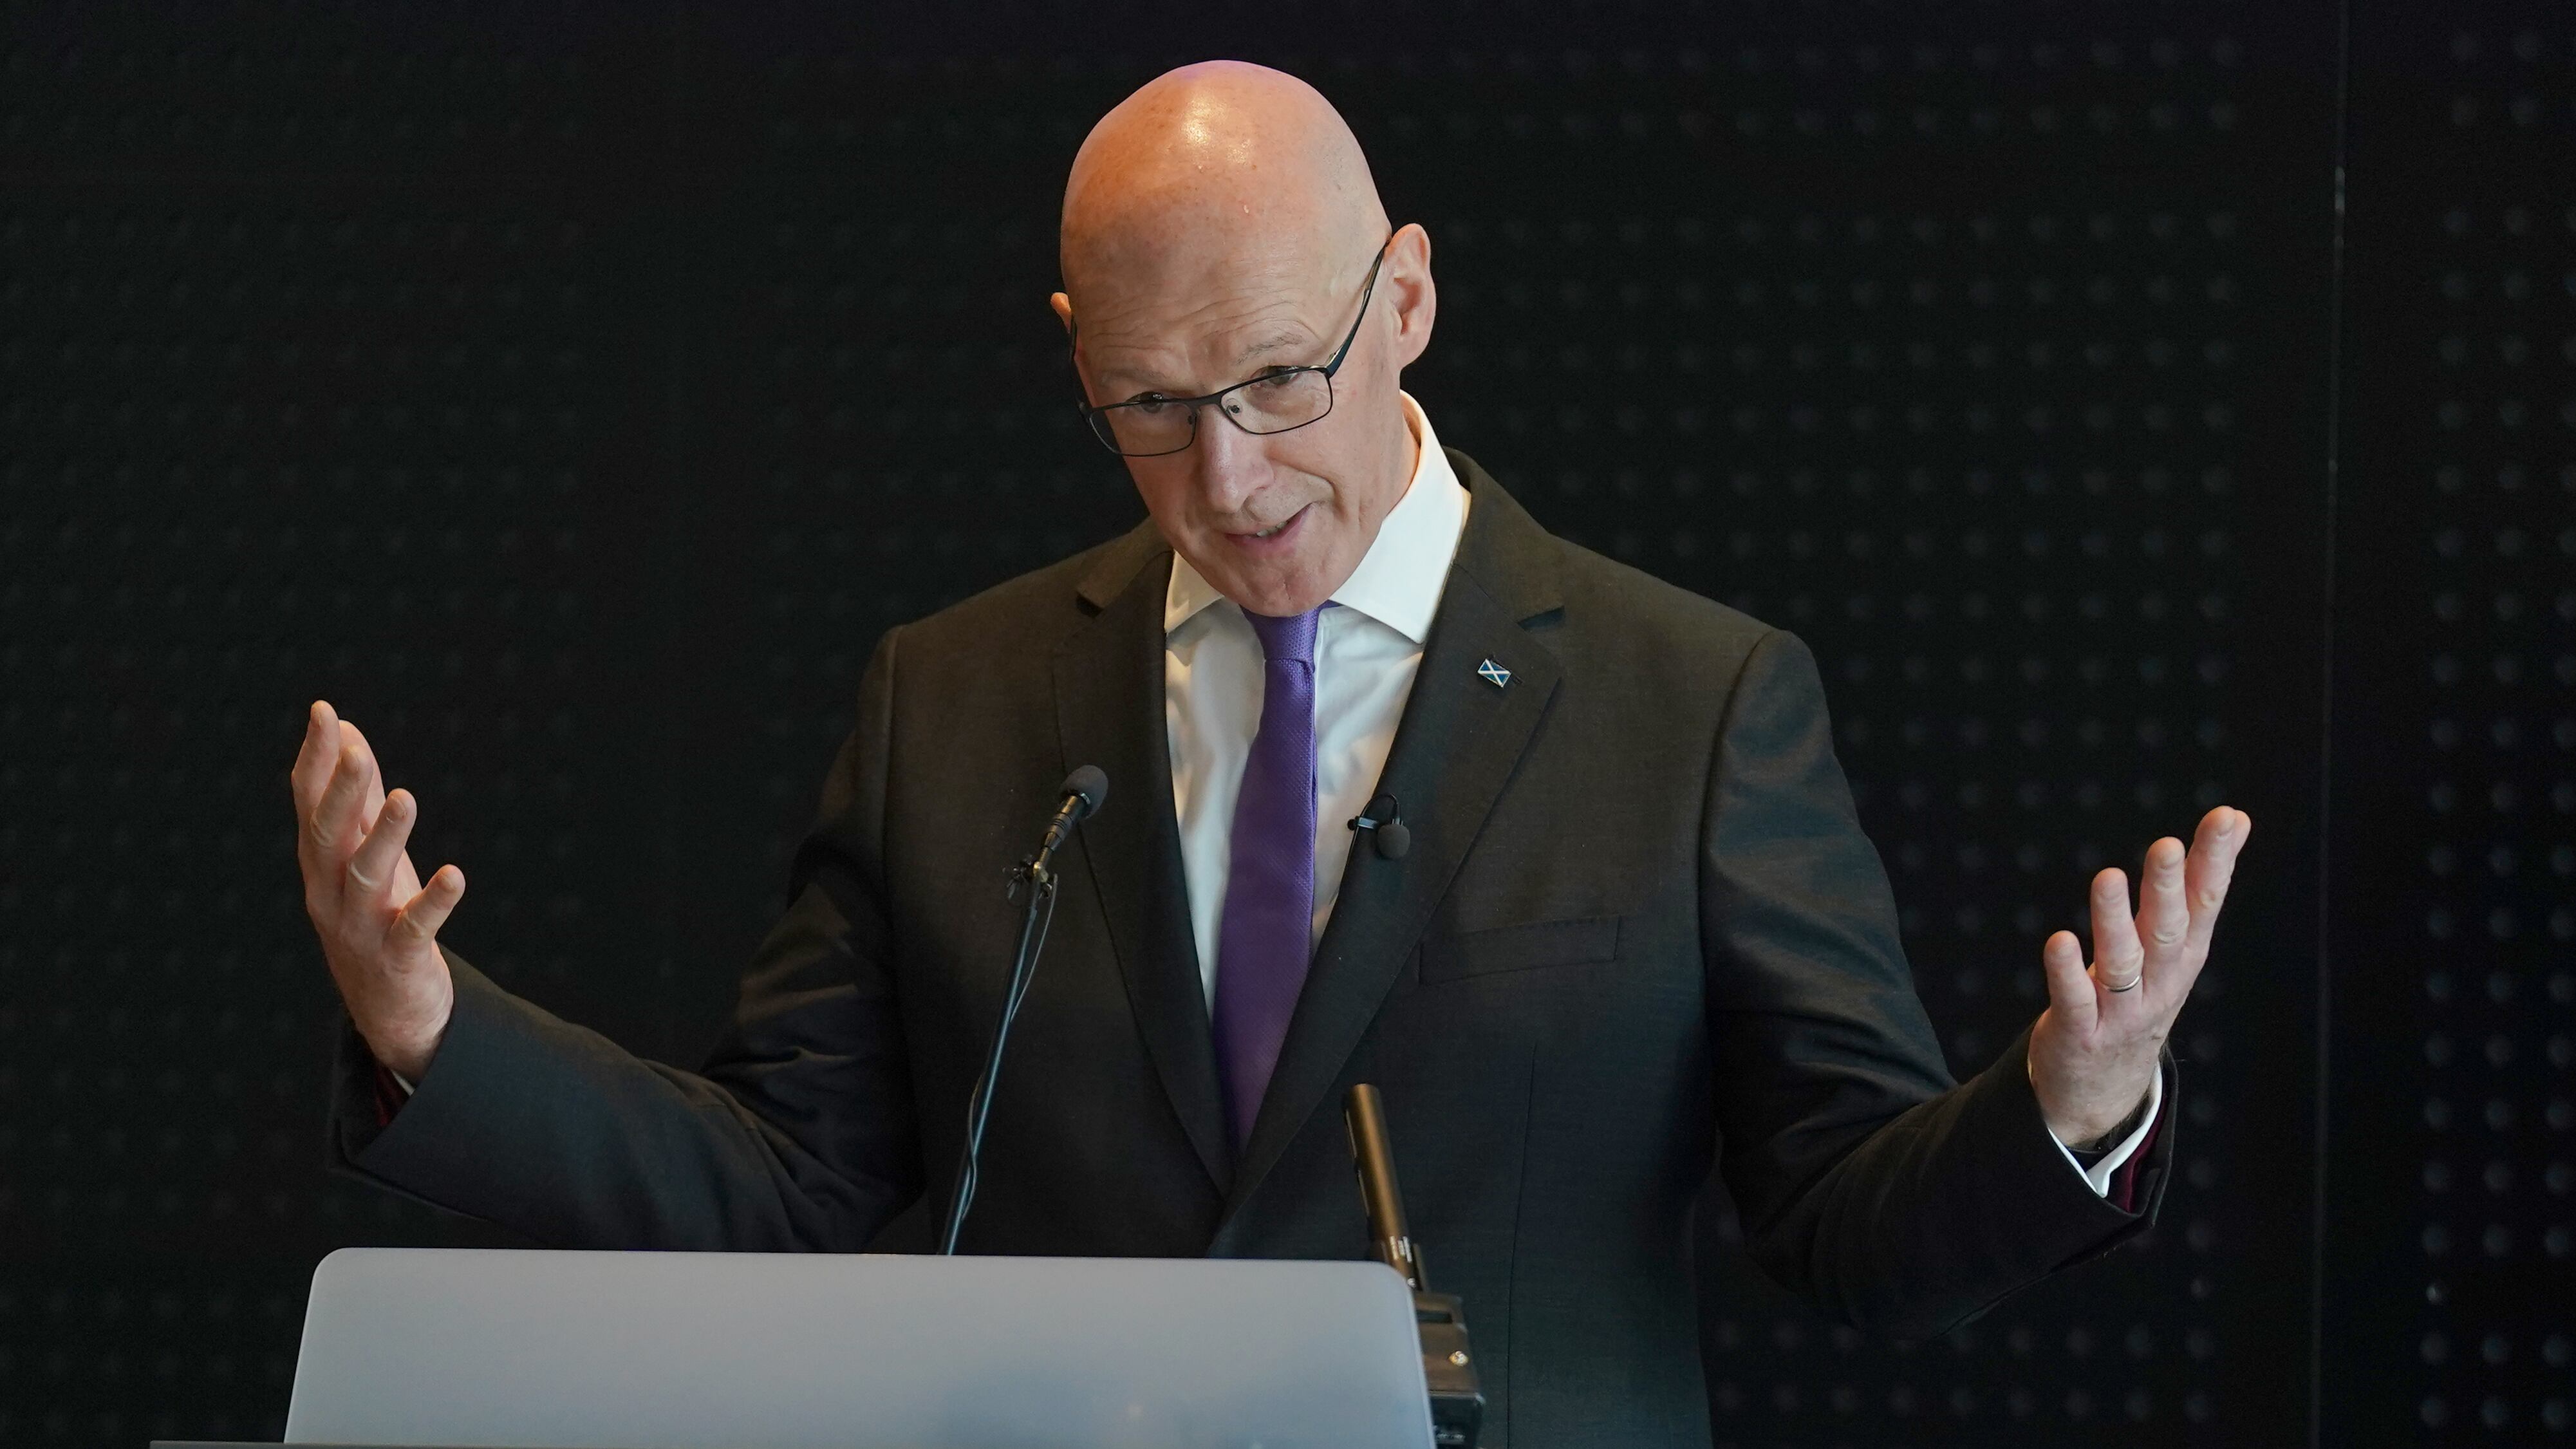 John Swinney addressed questions over funding awarded to the Rein project